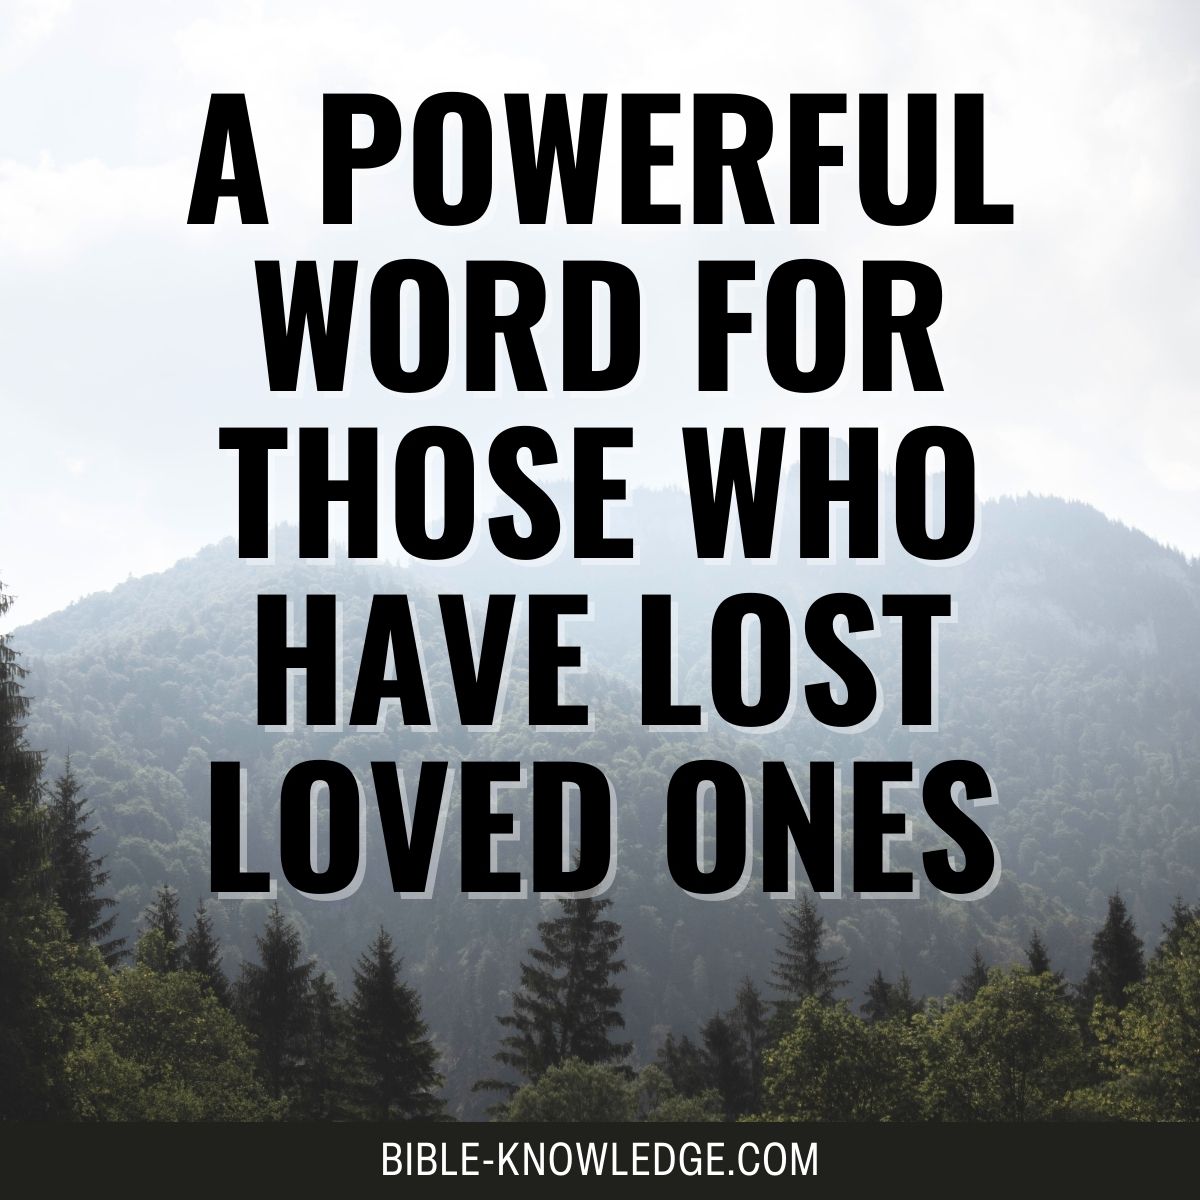 A Powerful Word For Those Who Have Lost Loved Ones